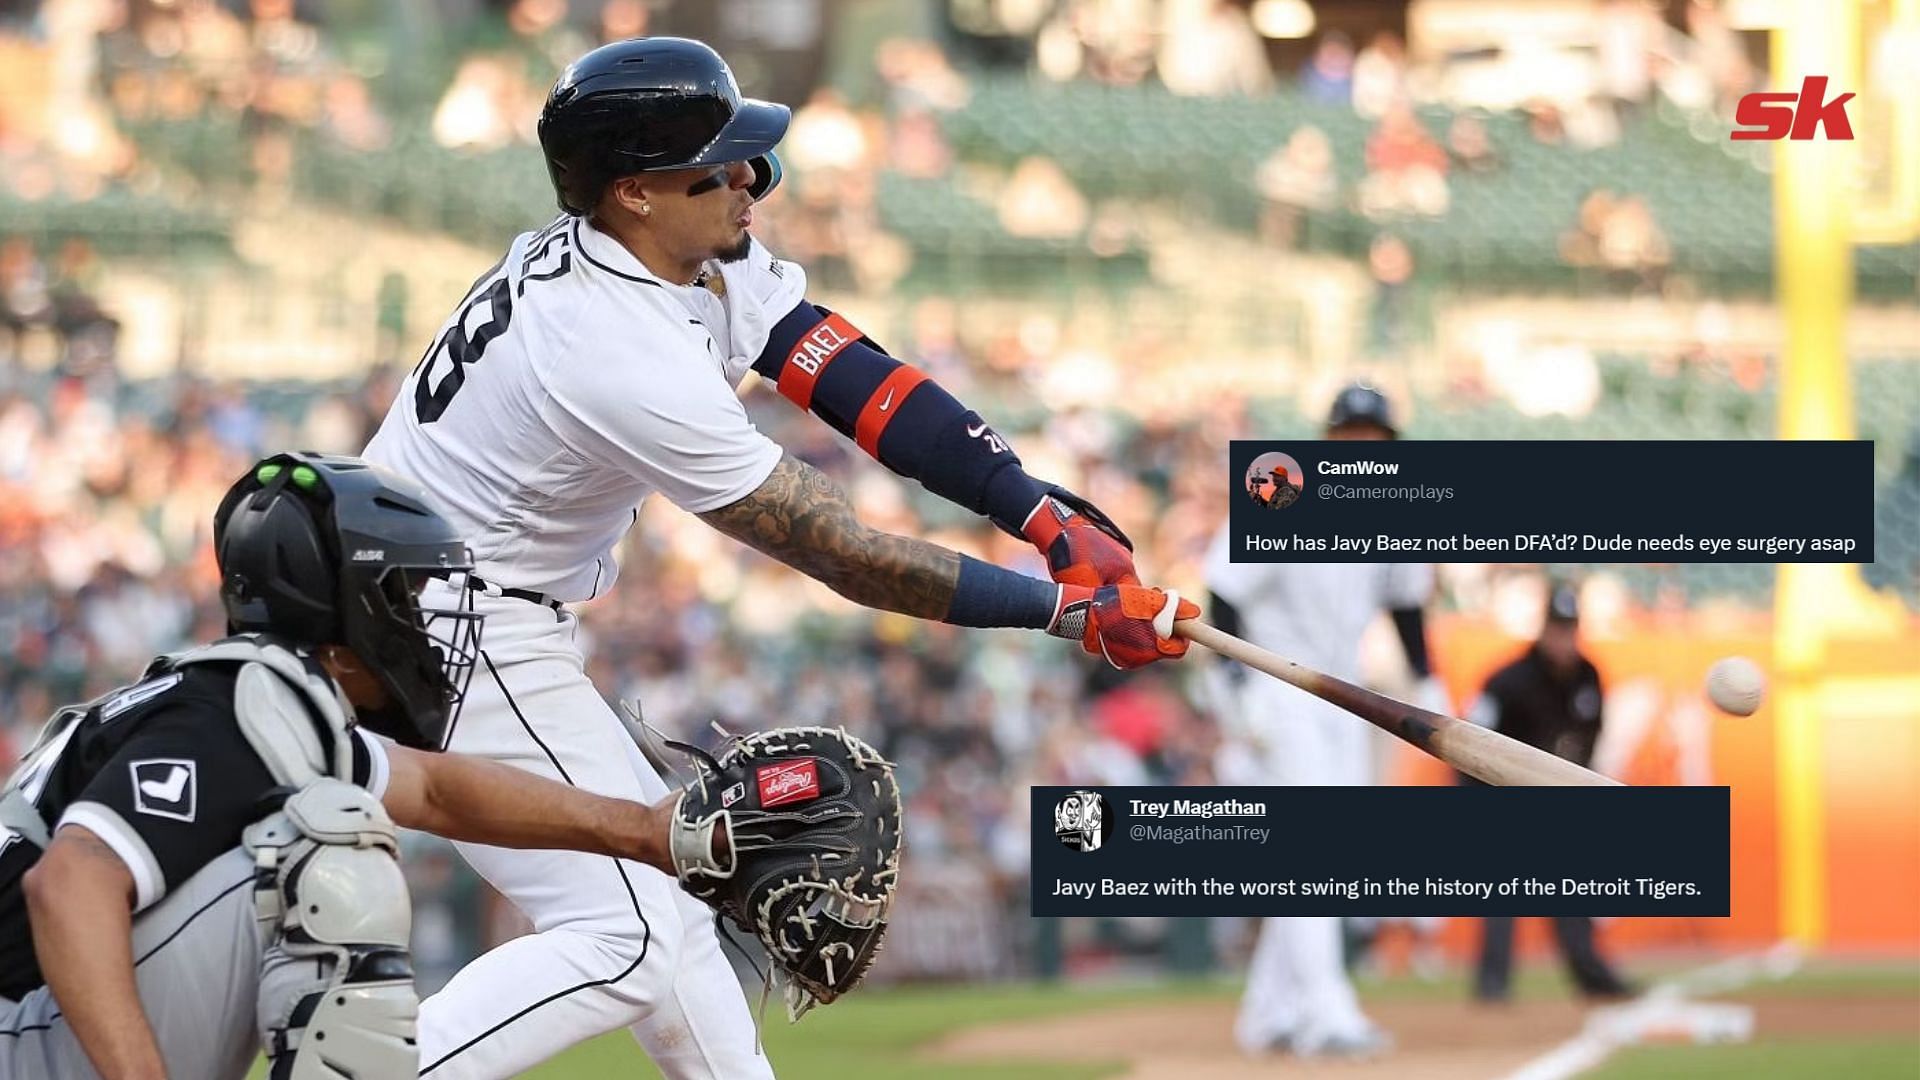 Javier Baez #28 of the Detroit Tigers hits a RBI single in the fourth inning in front of Seby Zavala #44 of the Chicago White Sox at Comerica Park on May 25th.